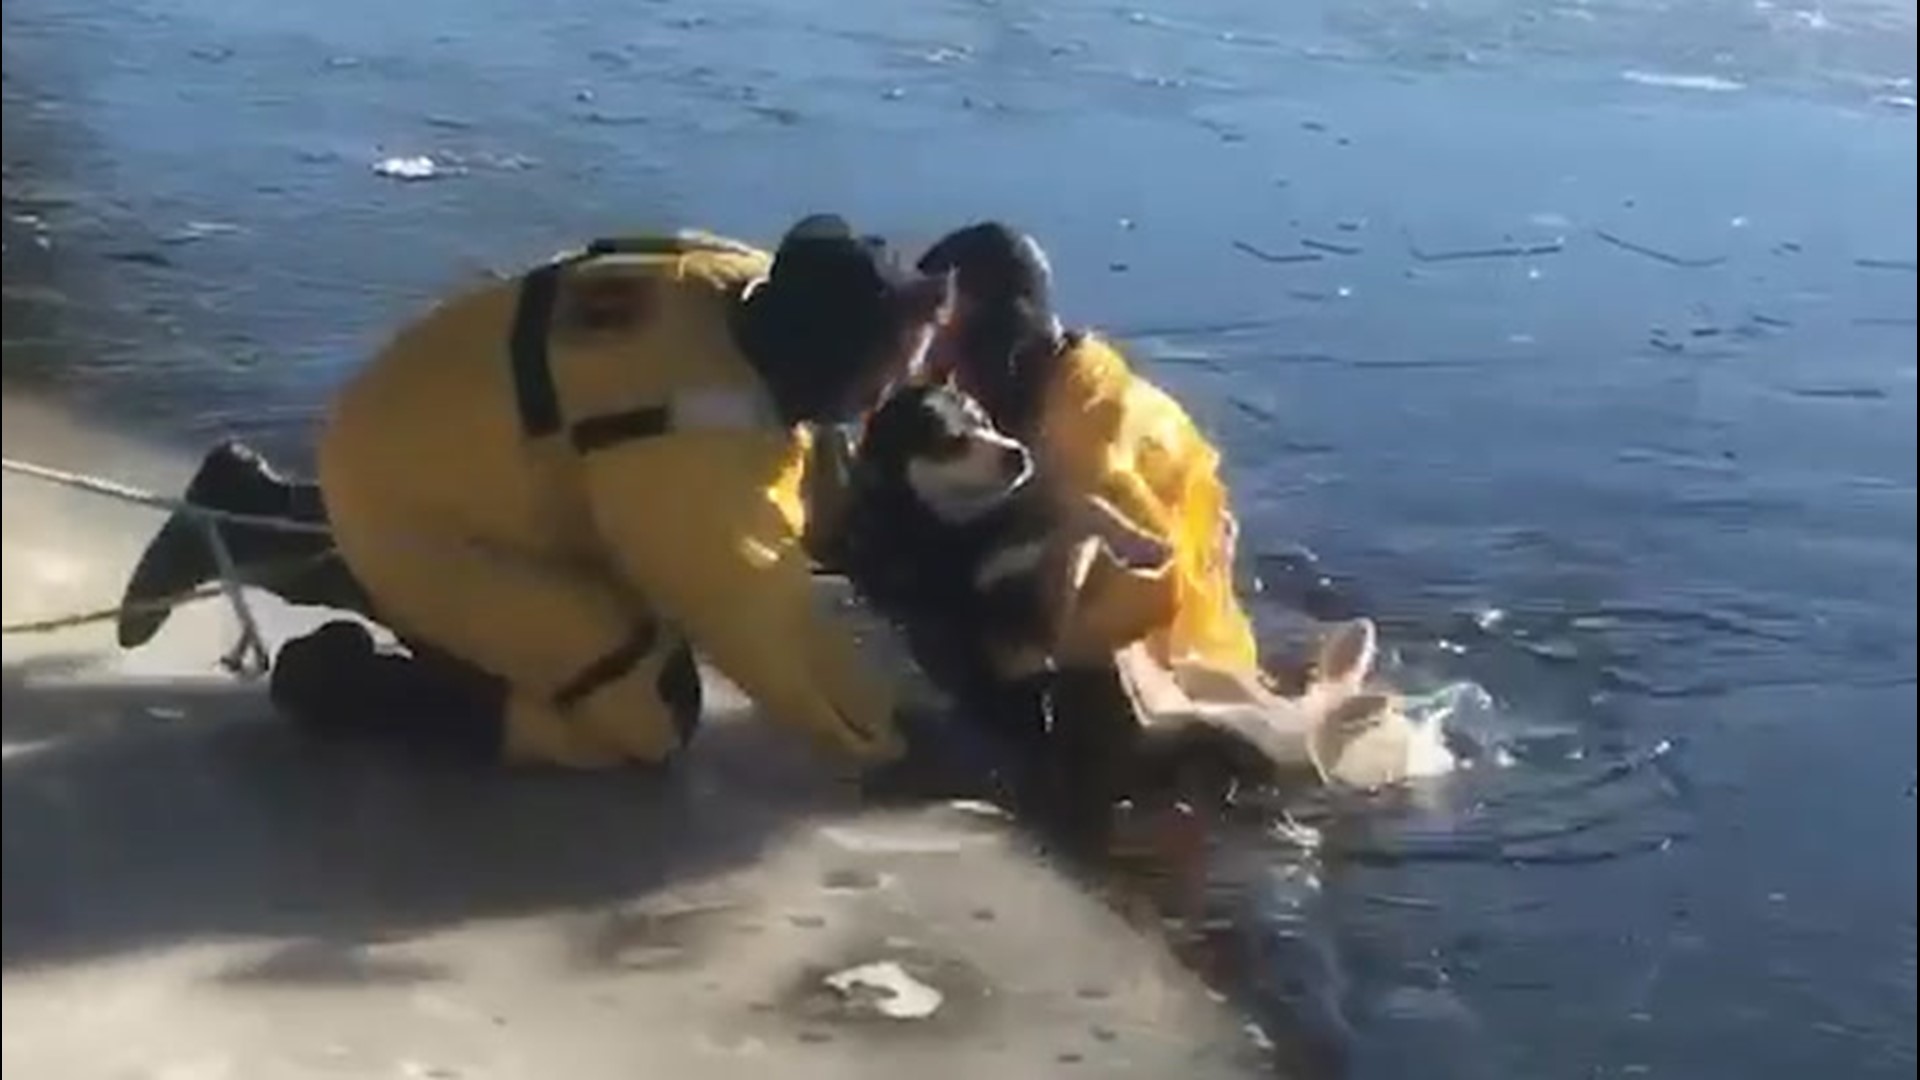 Firefighters braved icy water in Alpena, Michigan, to rescue a dog that had fallen through ice on a river on Jan. 8.